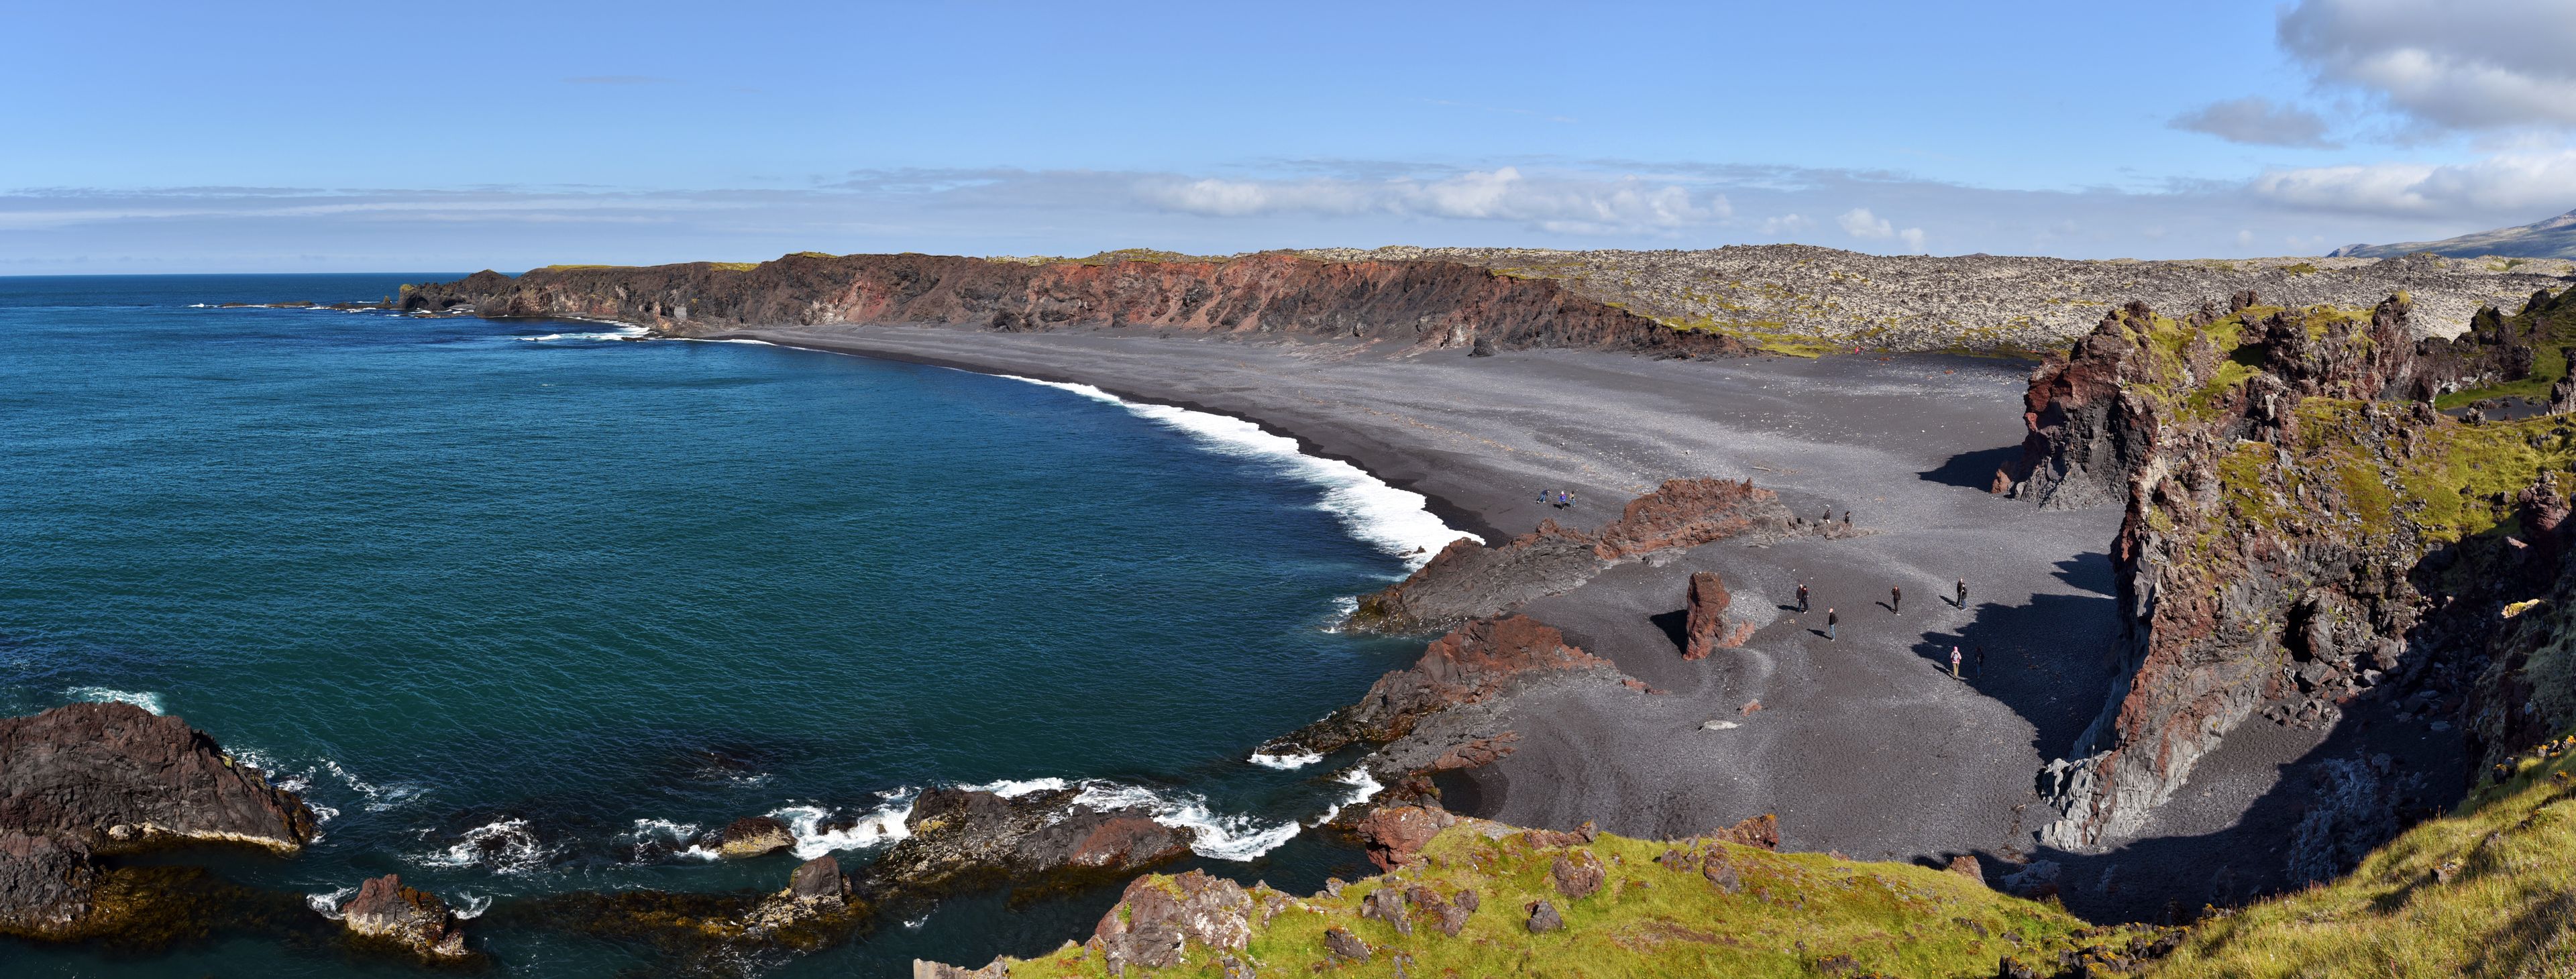 Stunning nature at djúpalónssandur during a  early summer with volcanic rock around the beach.